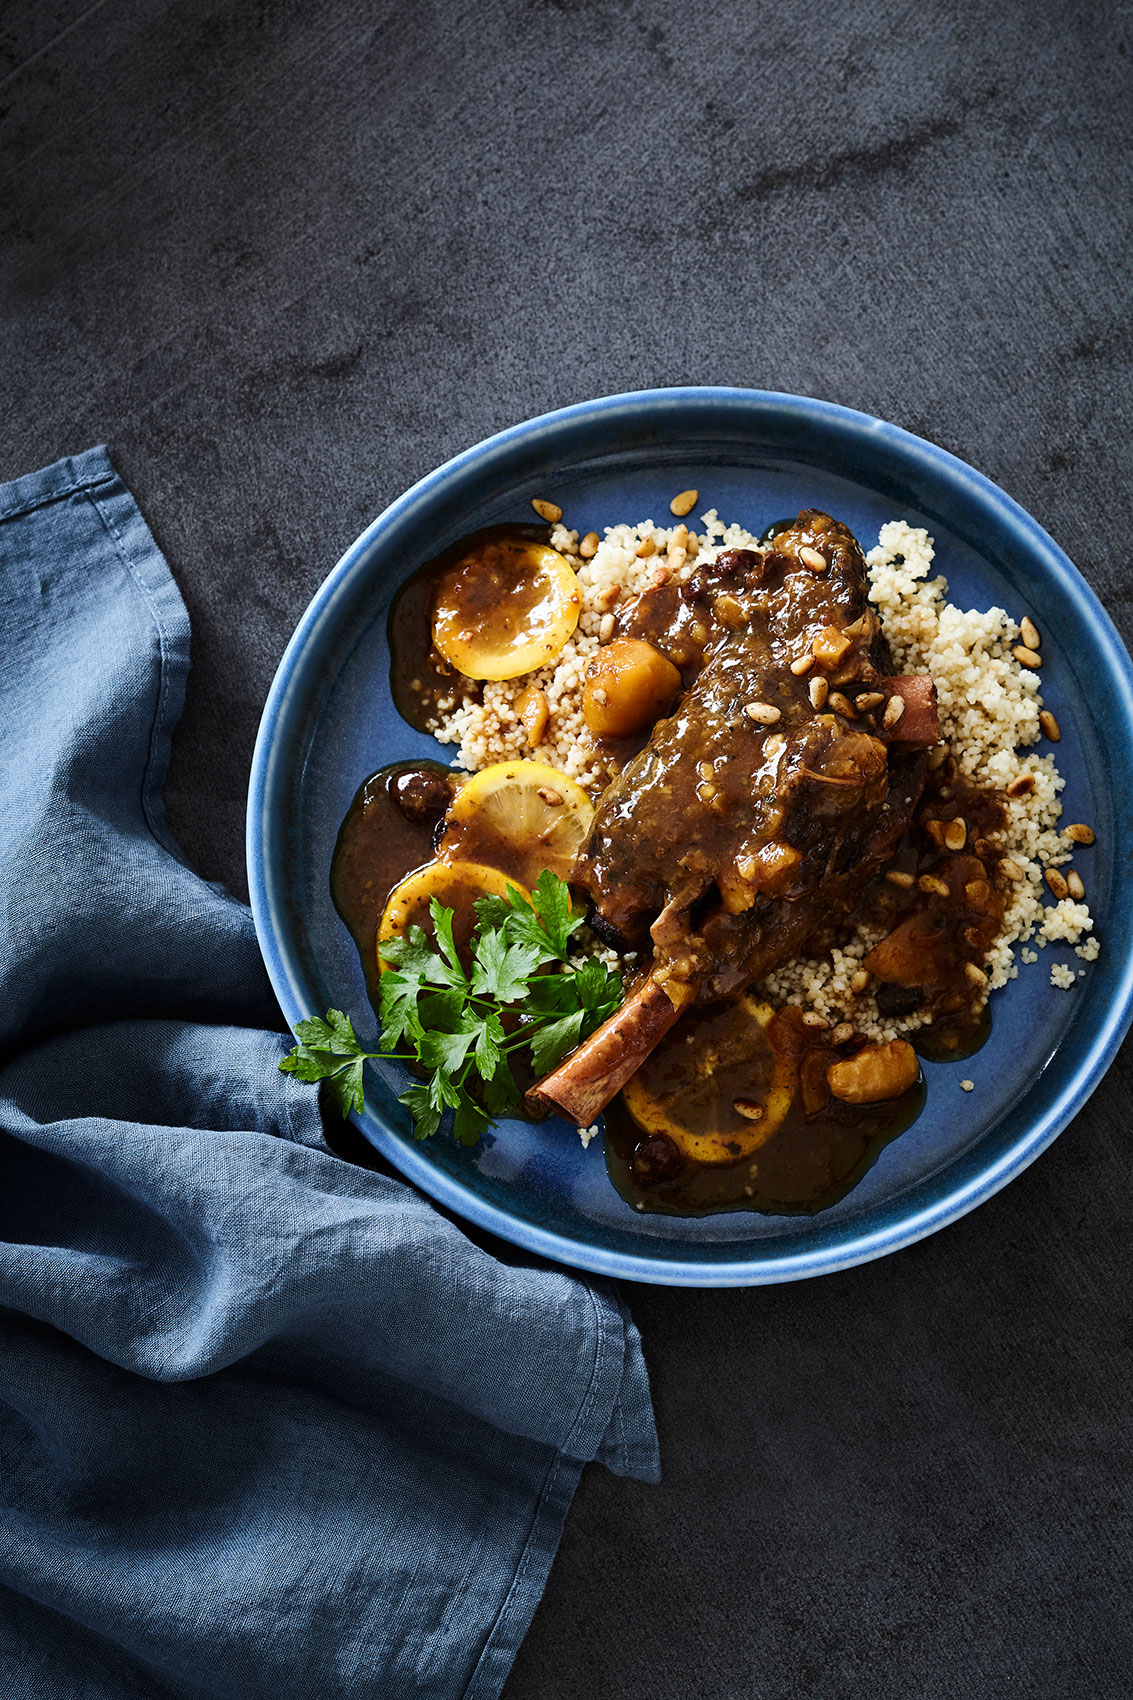 Slow Cooked • Lamb Shank Tajine on Couscous with Pine Nuts • Cookbook & Editorial Food Photography